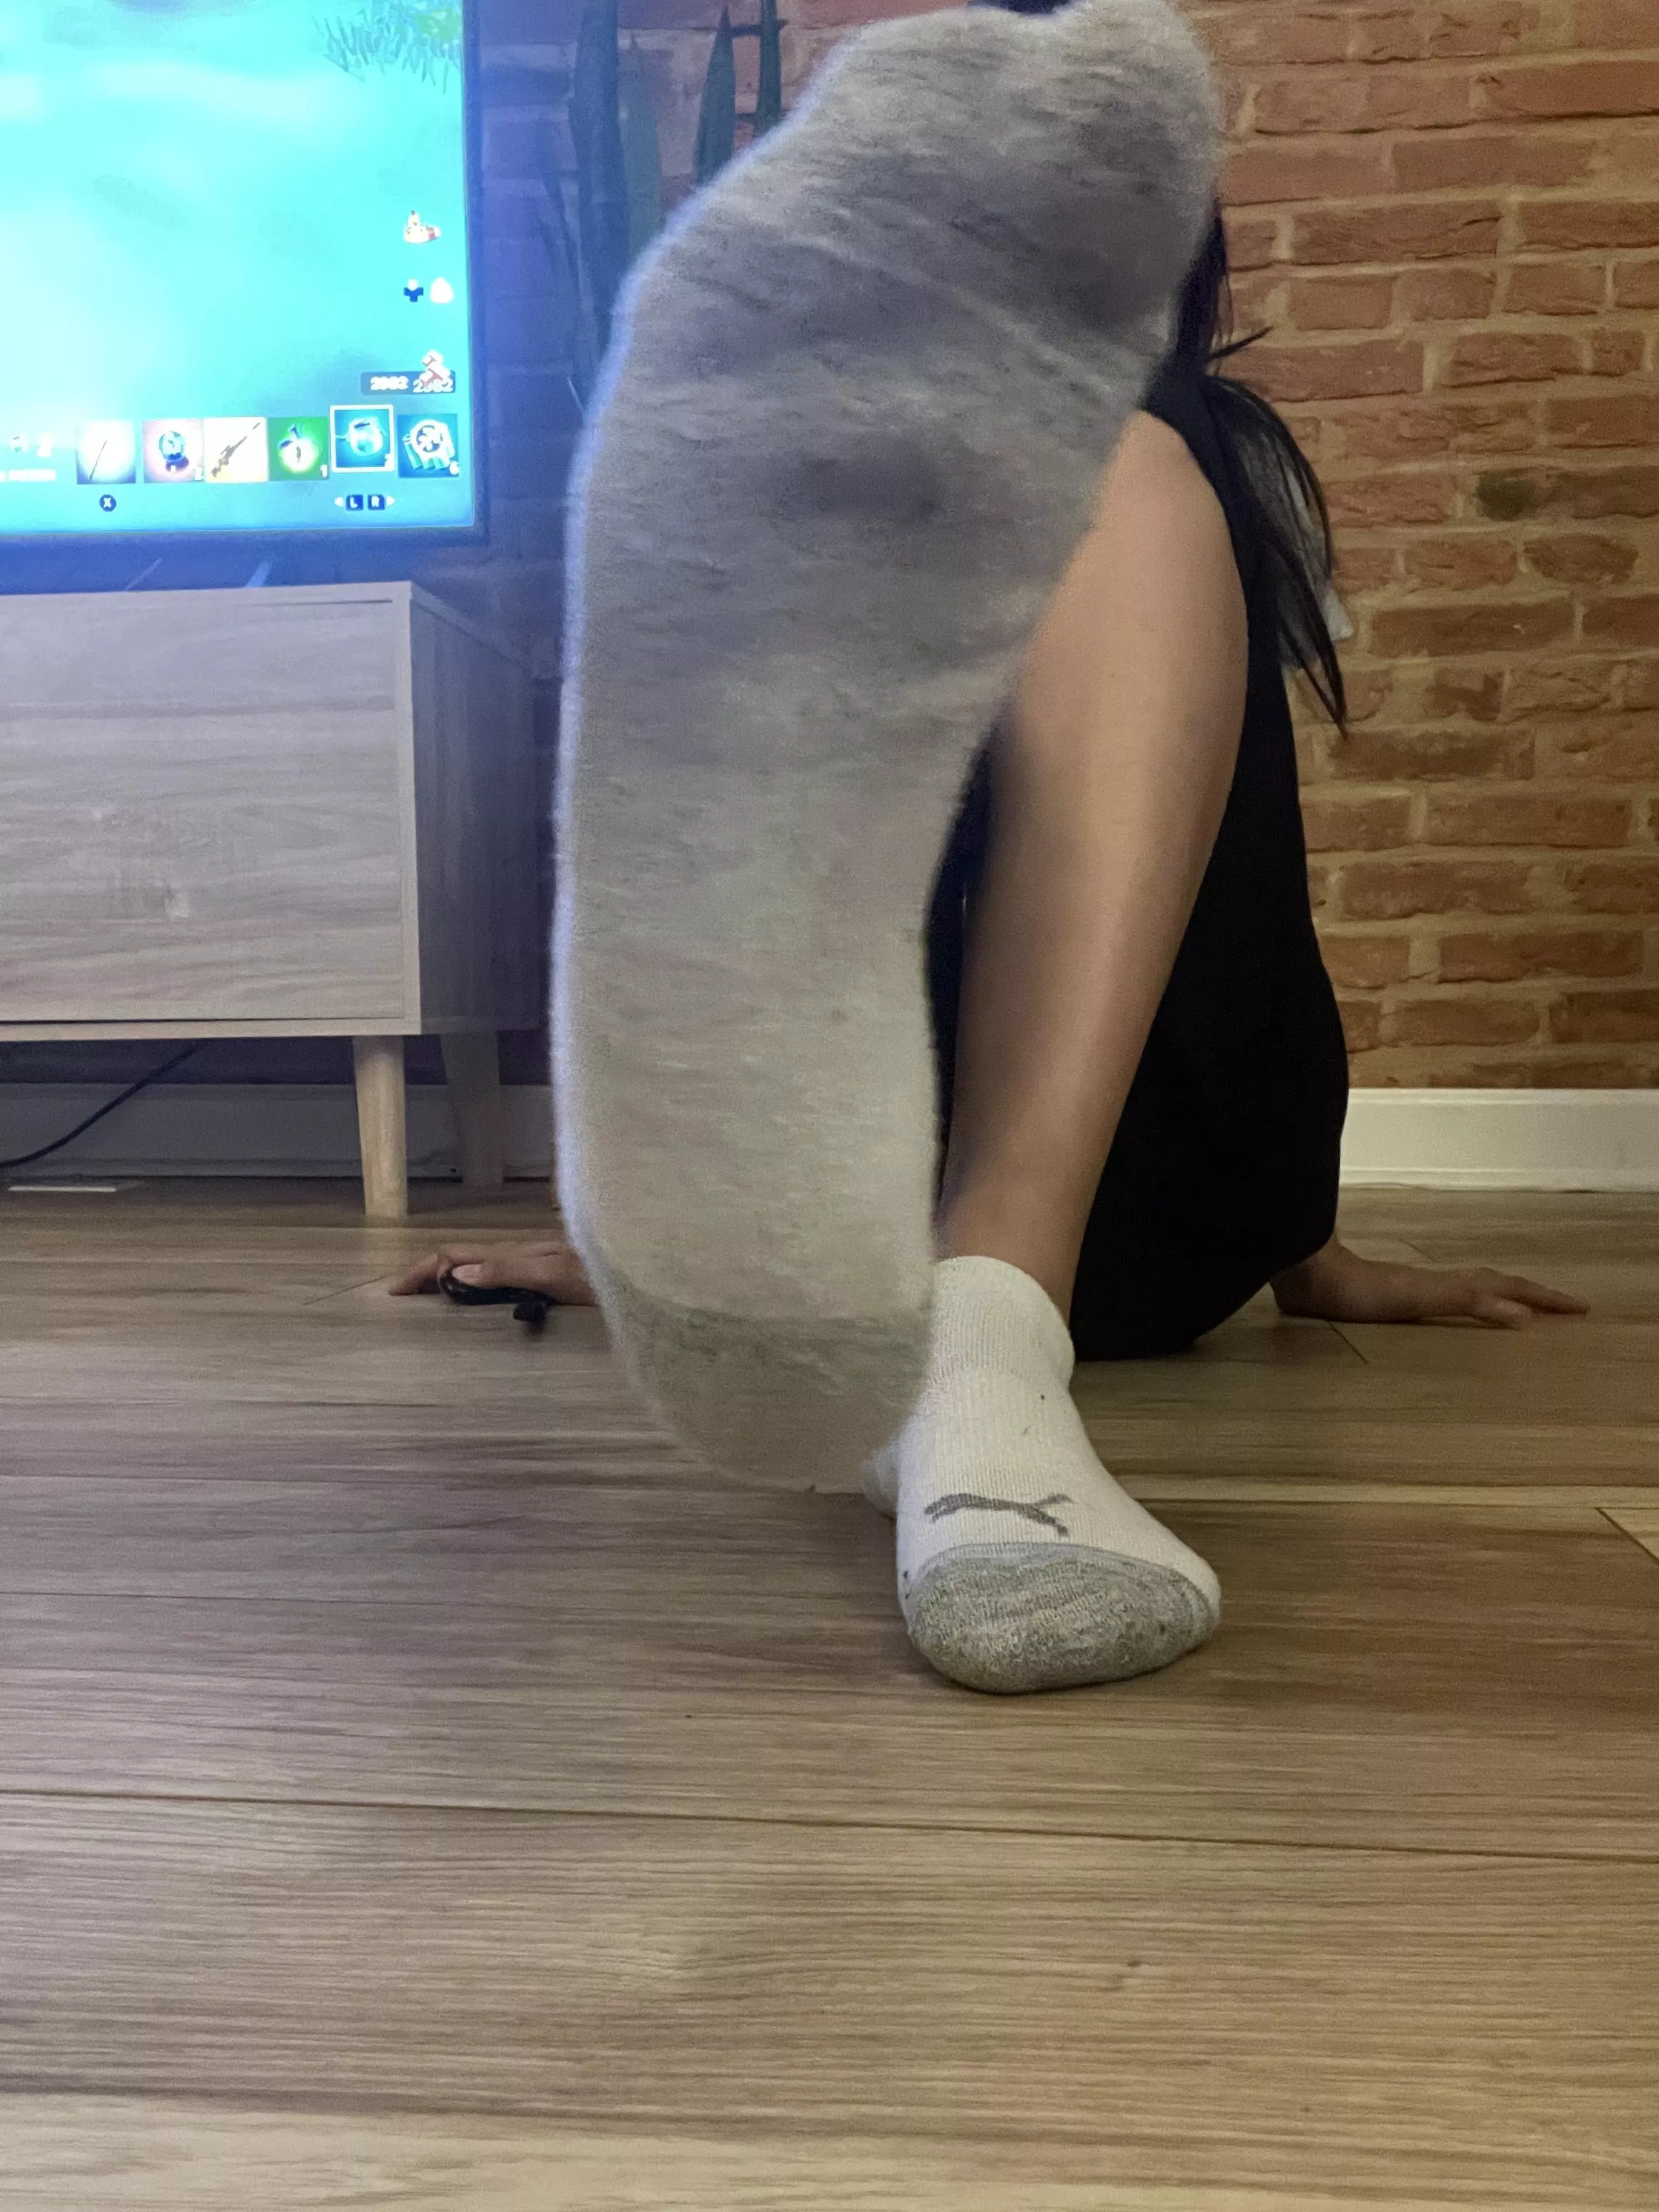 Socks Porn Asian Face - Are dirty, smelly socks better in your mouth or on your face? ðŸ’œ  [Selling][US] nudes by Silly-Asian-Kitty